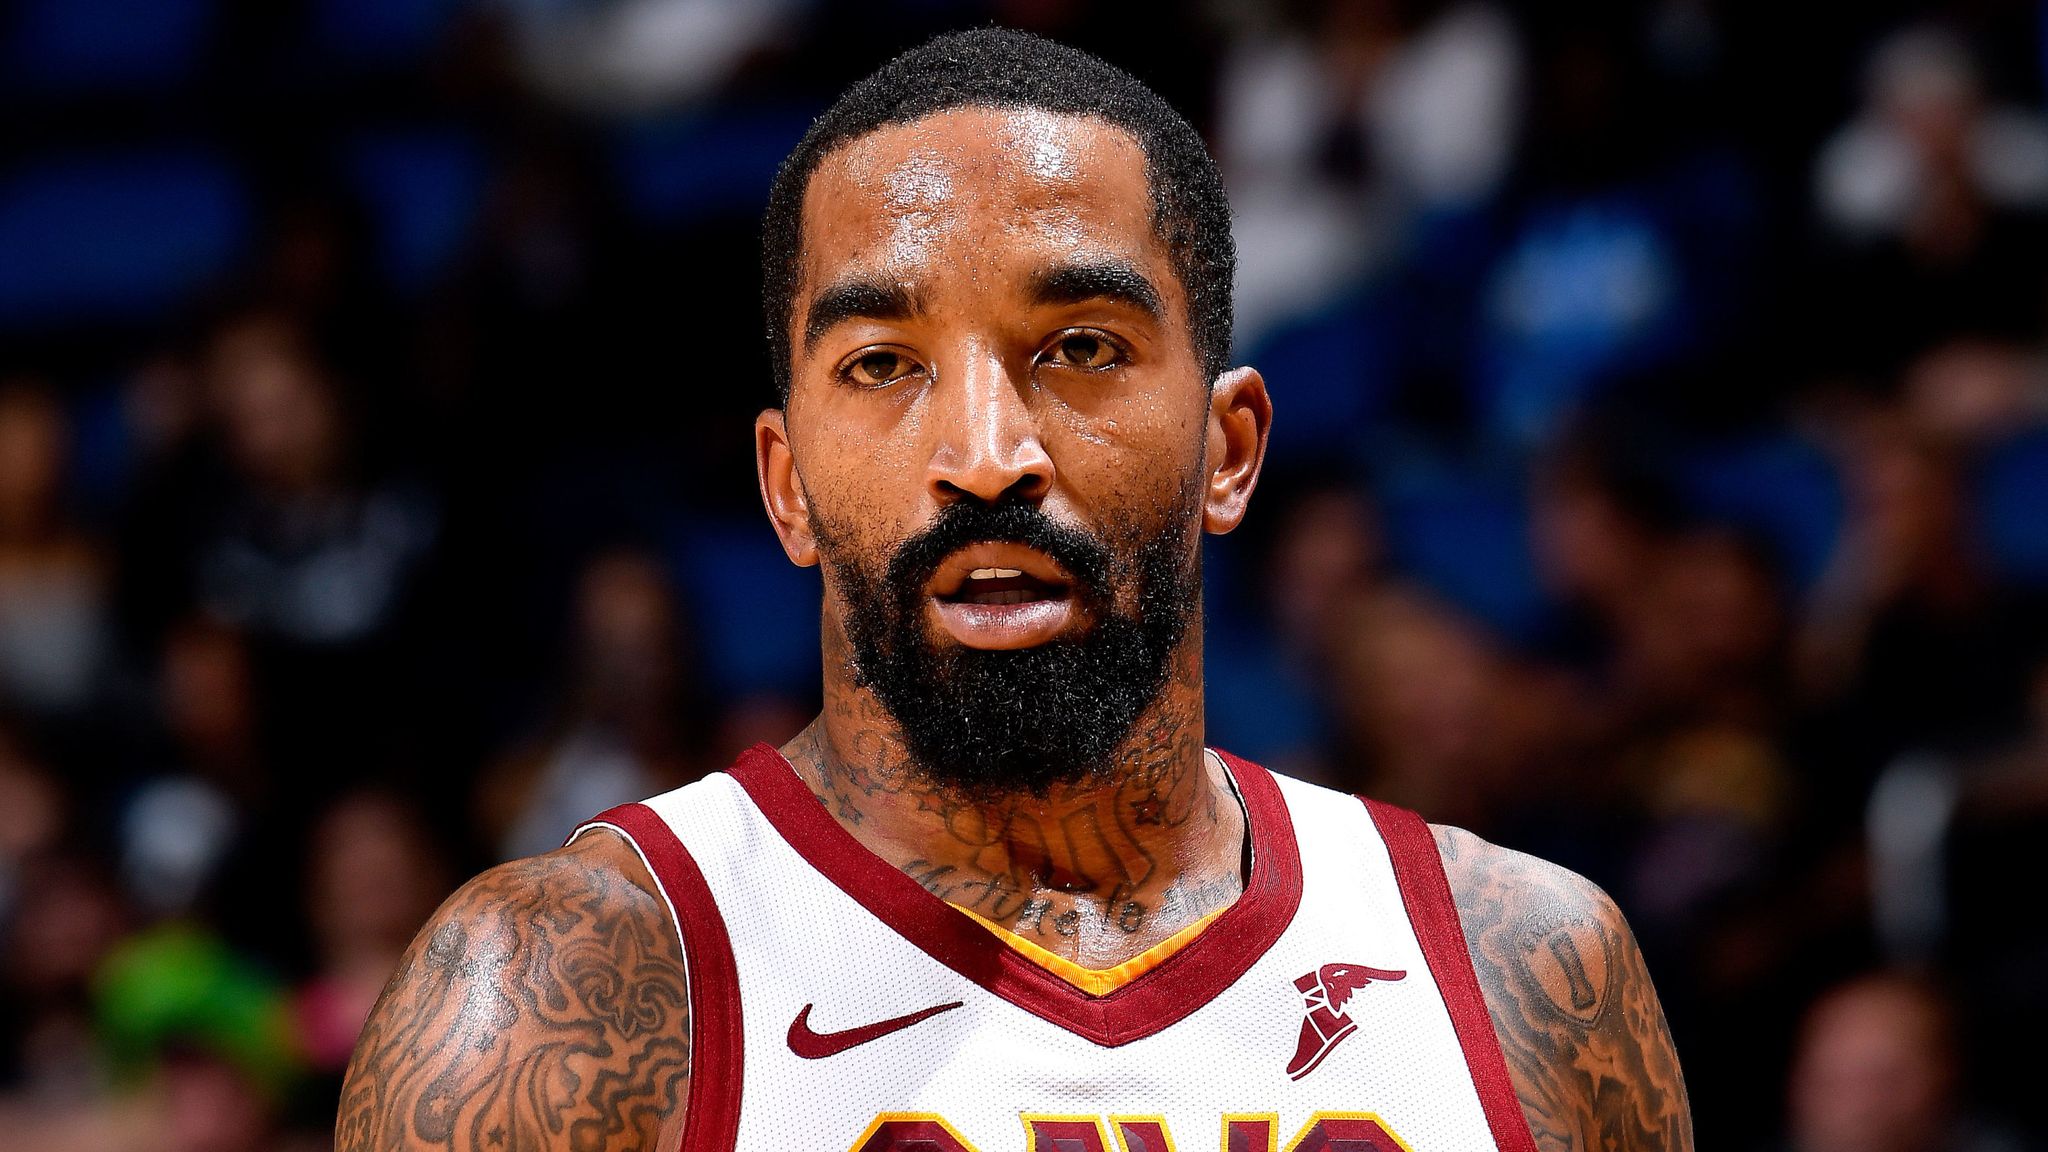 J.R. Smith will get a Knicks tattoo if they win the NBA championship